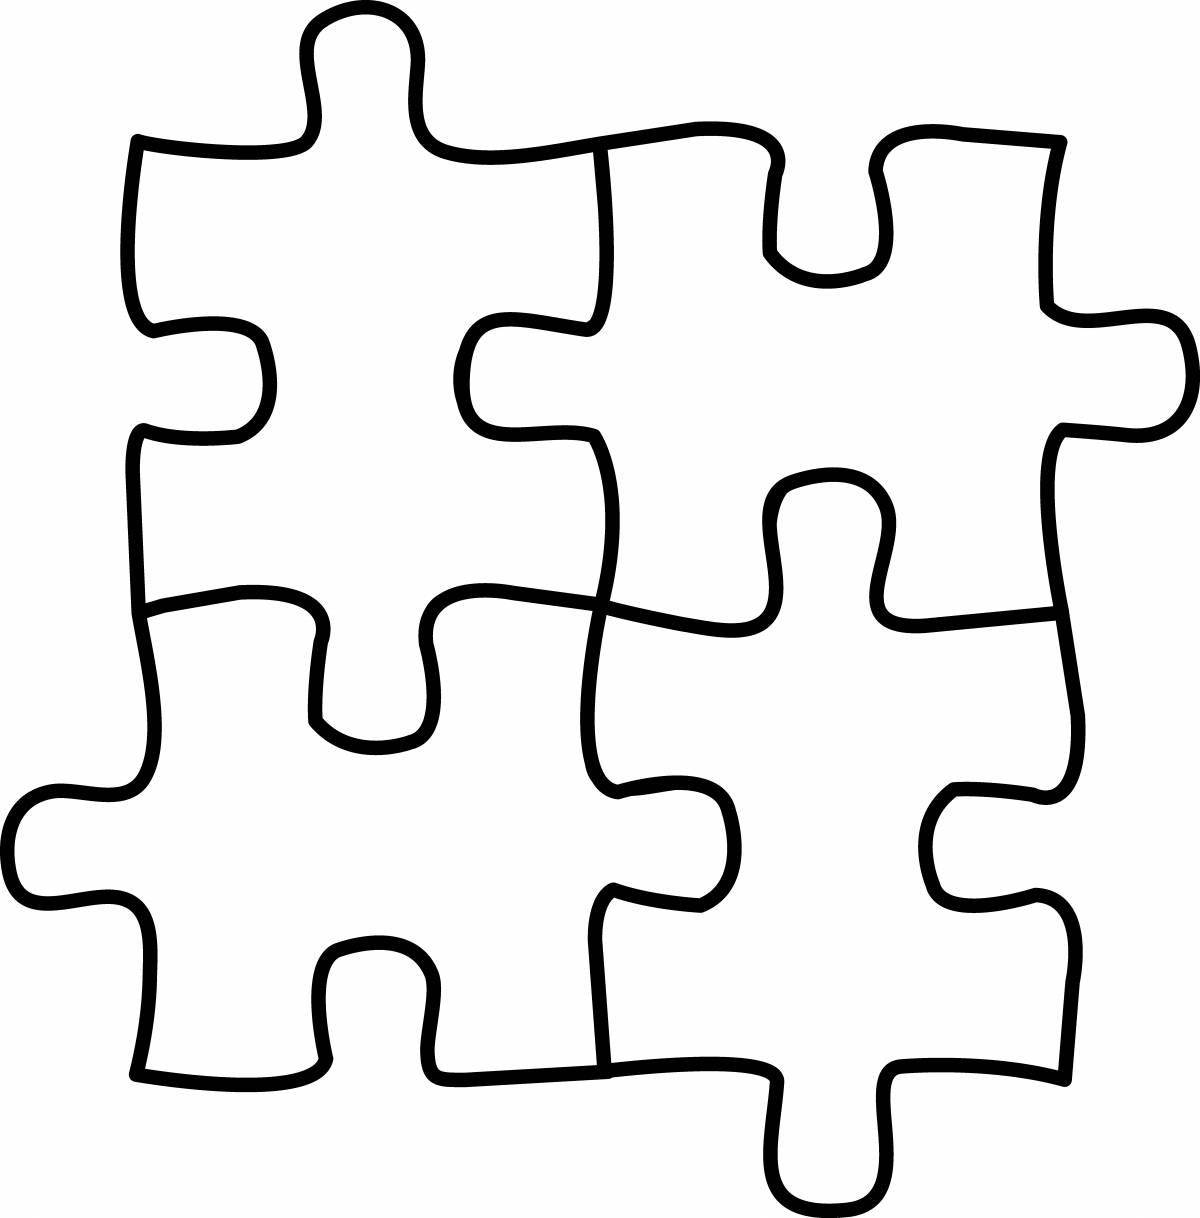 Adorable children's puzzles for children 3-4 years old without registration